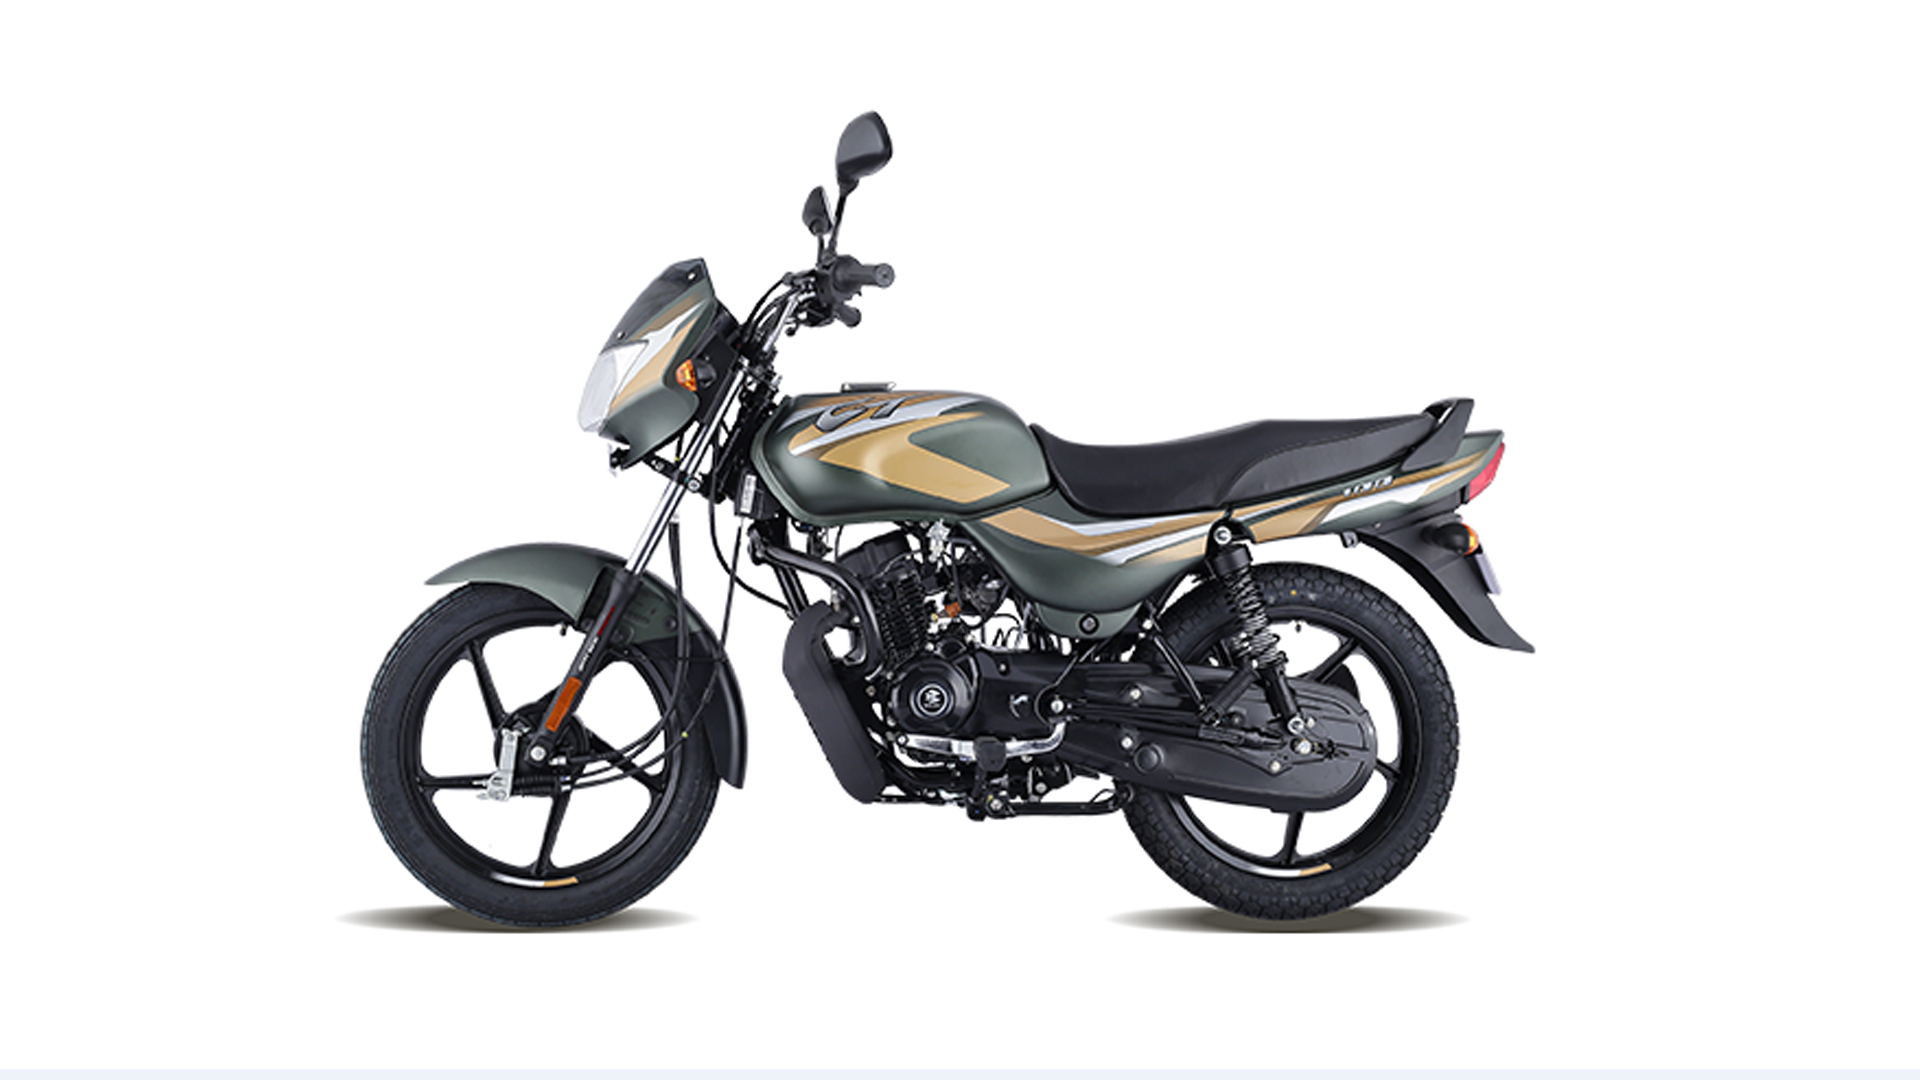 Bajaj Ct 100 15 Alloy Price Mileage Reviews Specification Gallery Overdrive